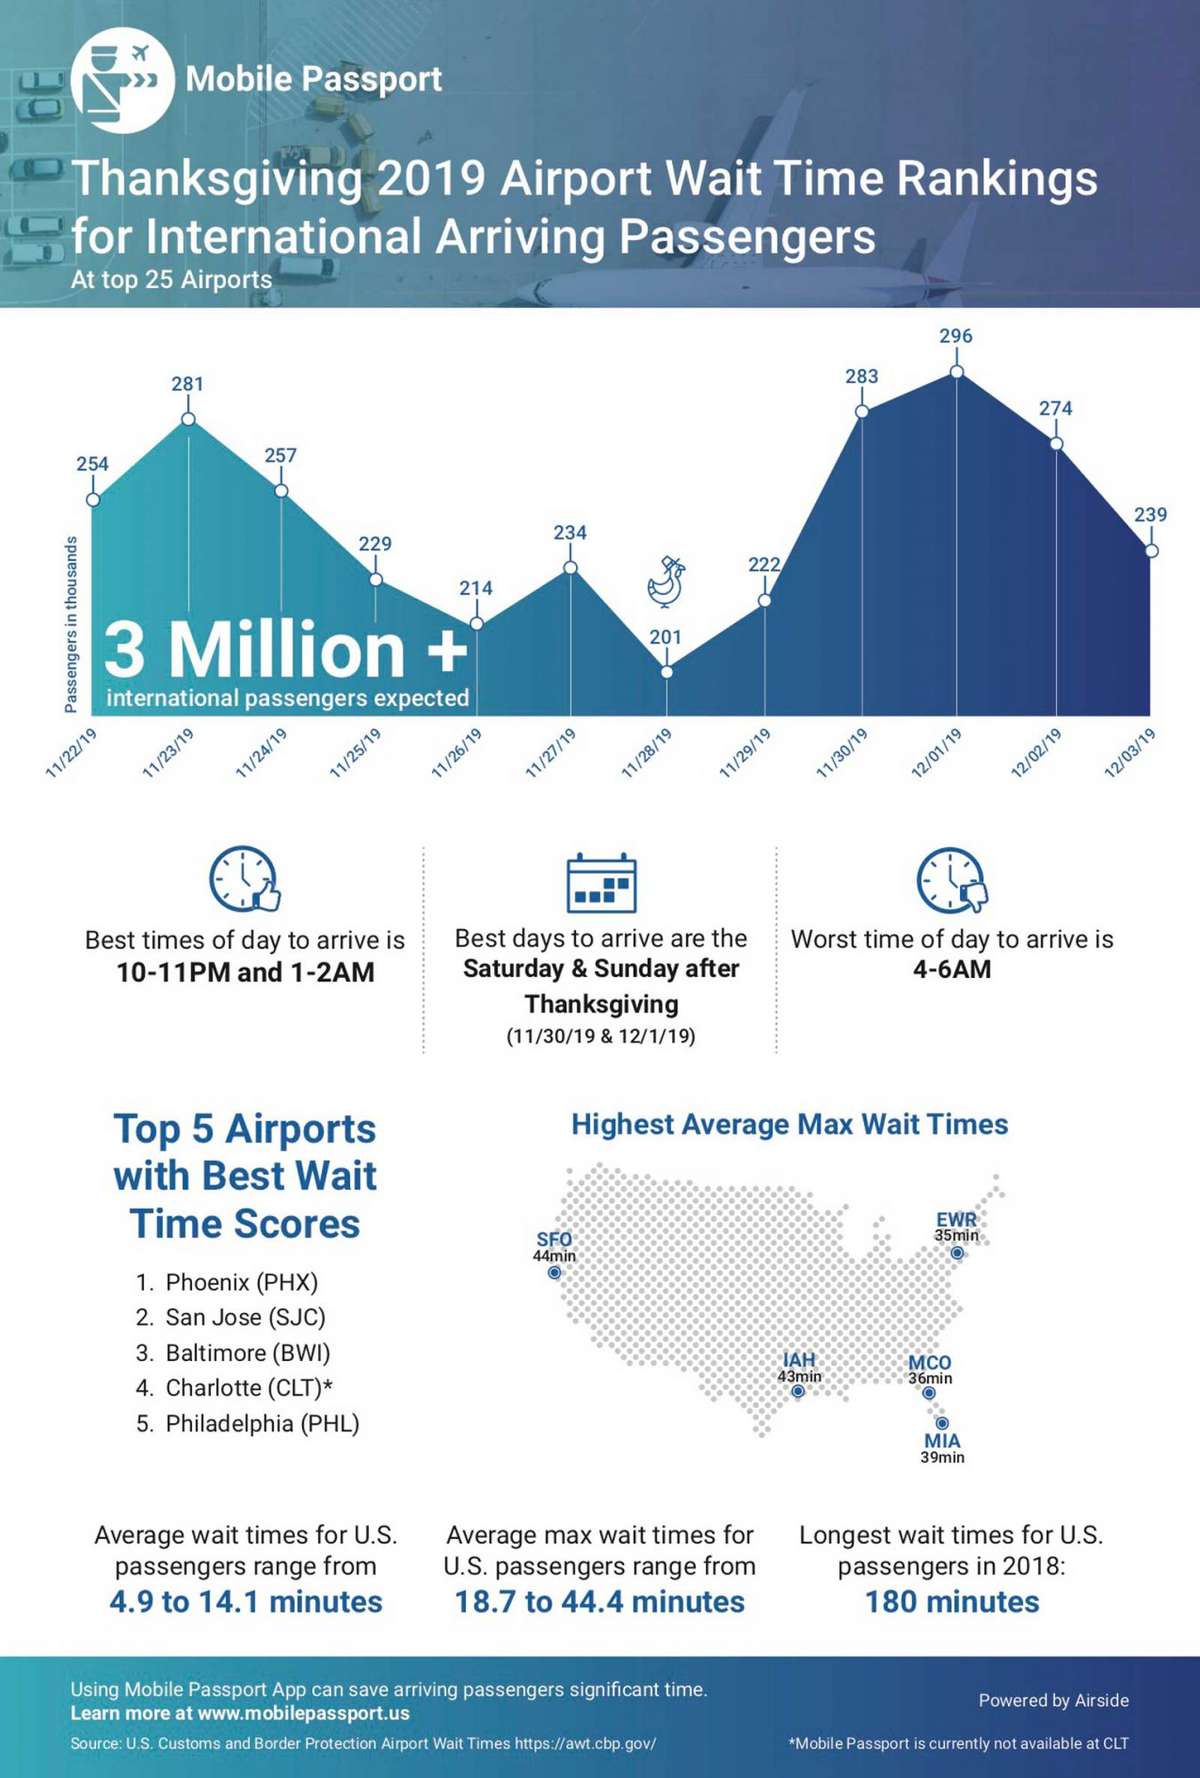 Airport Wait Time Rankings for Thanksgiving via Mobile Passport